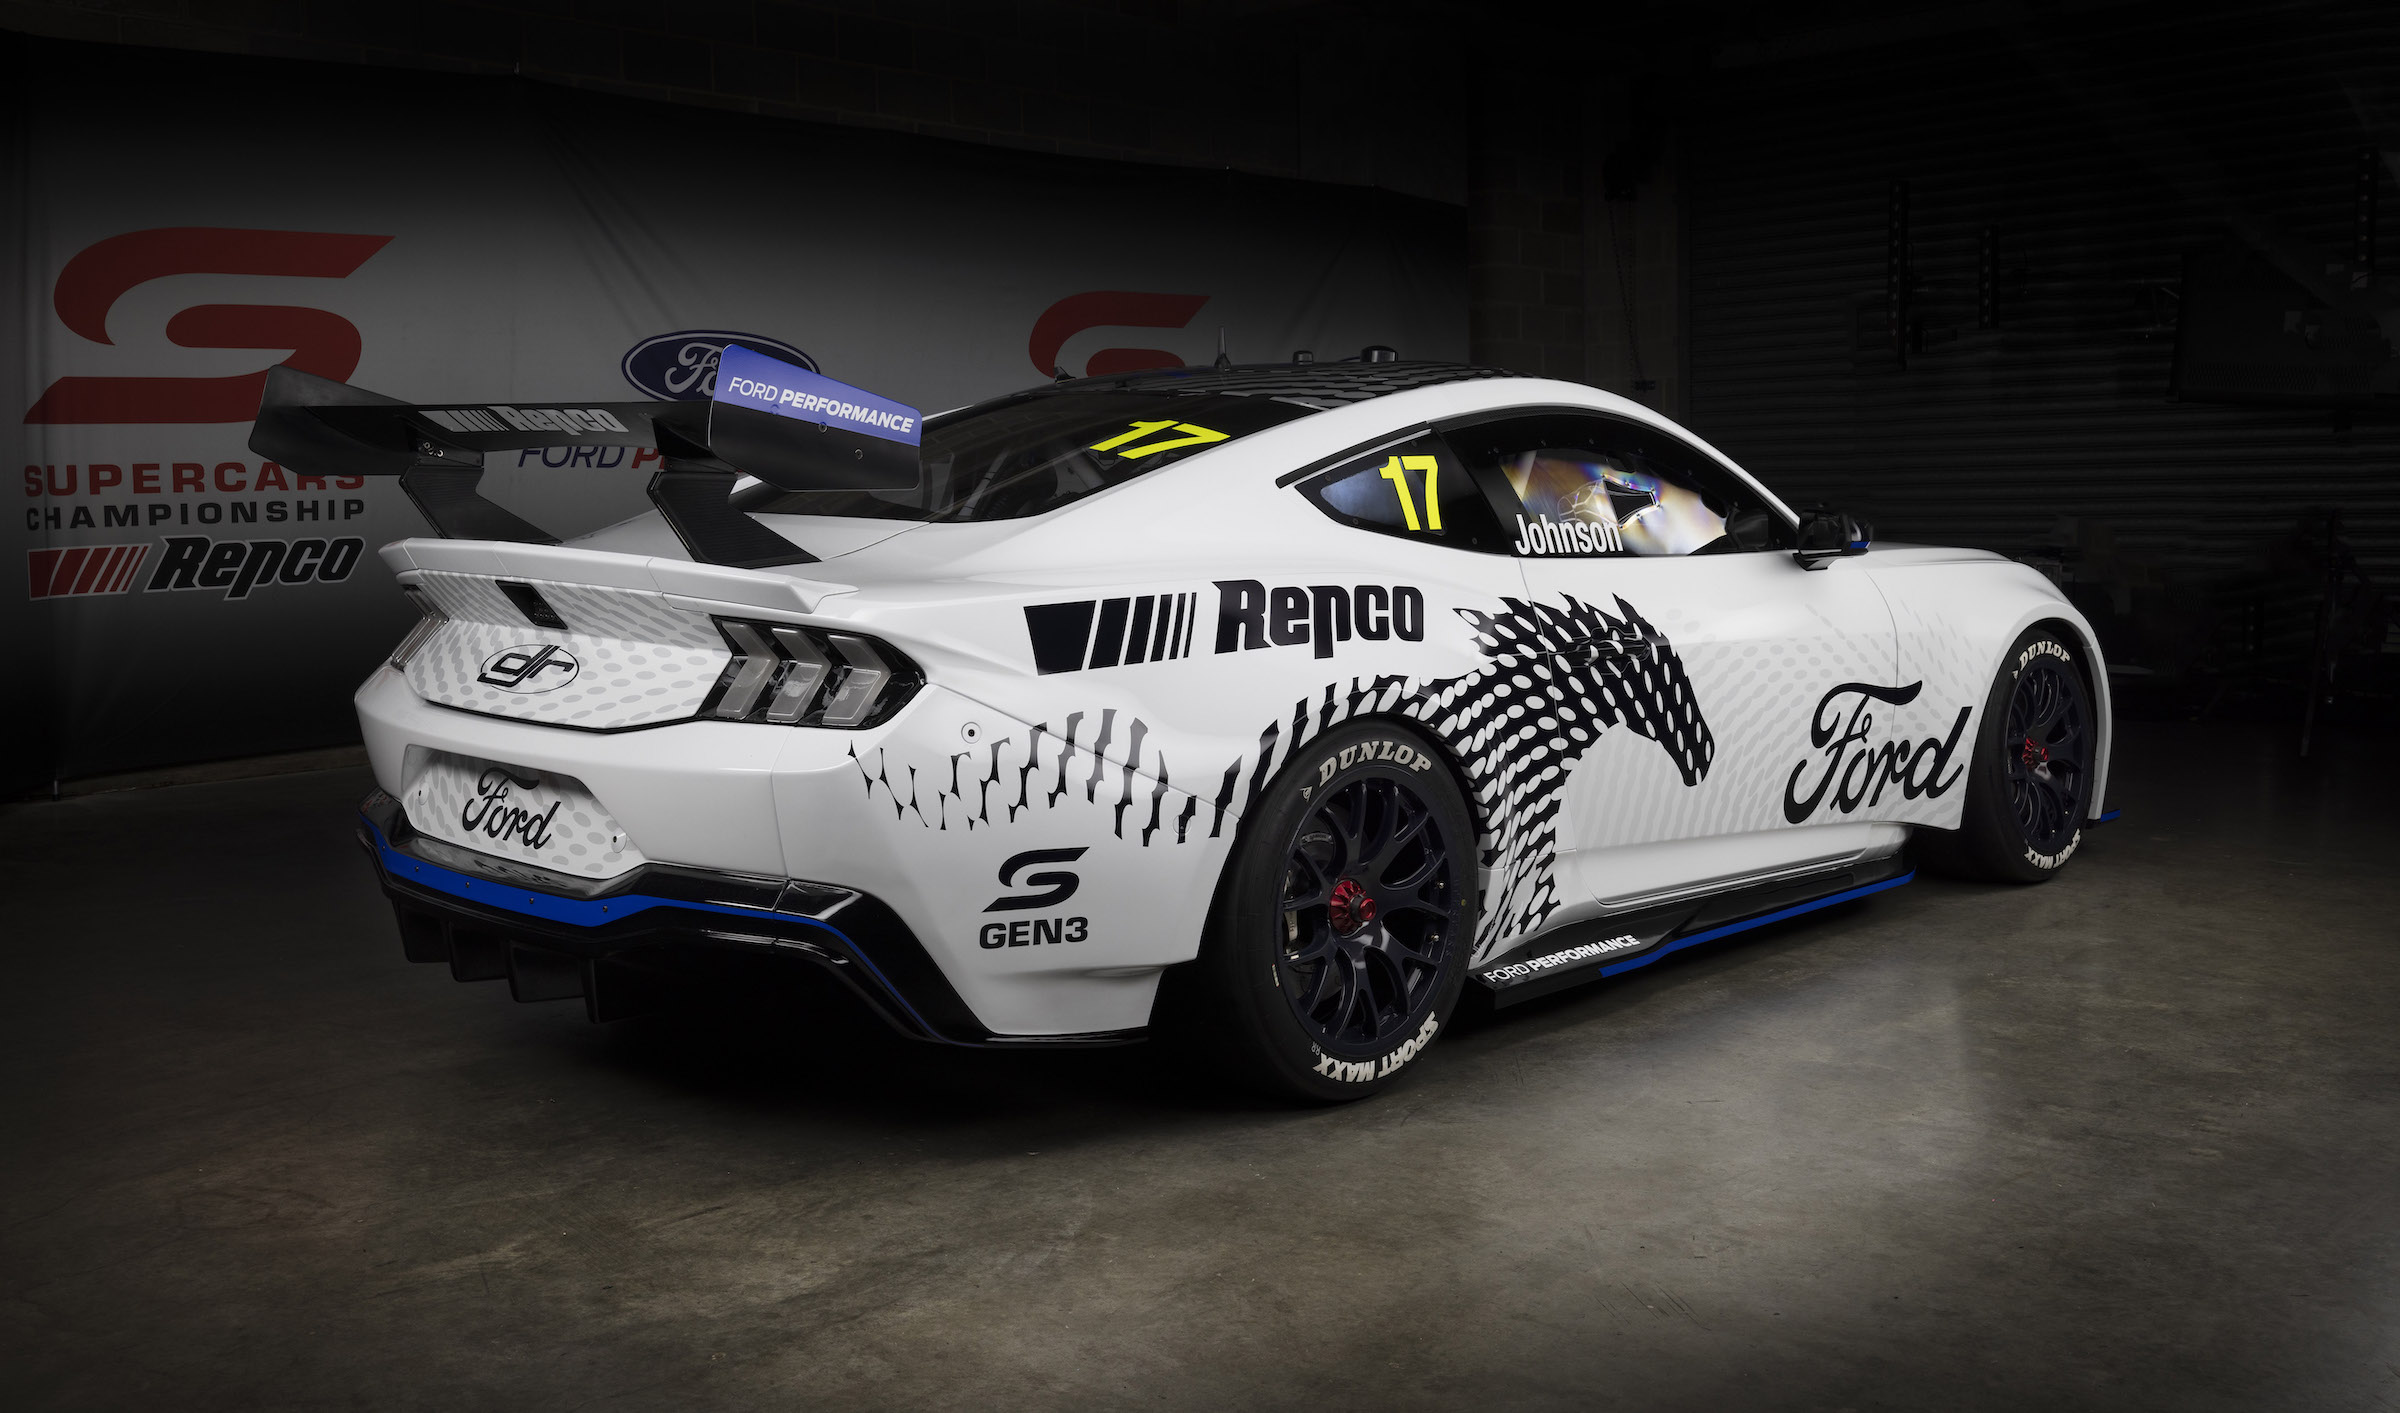 S650 Mustang All-New Ford Mustang (S650) GT Supercars Race Car Revealed at Bathurst 1000 EV-11-22-1J1A0628